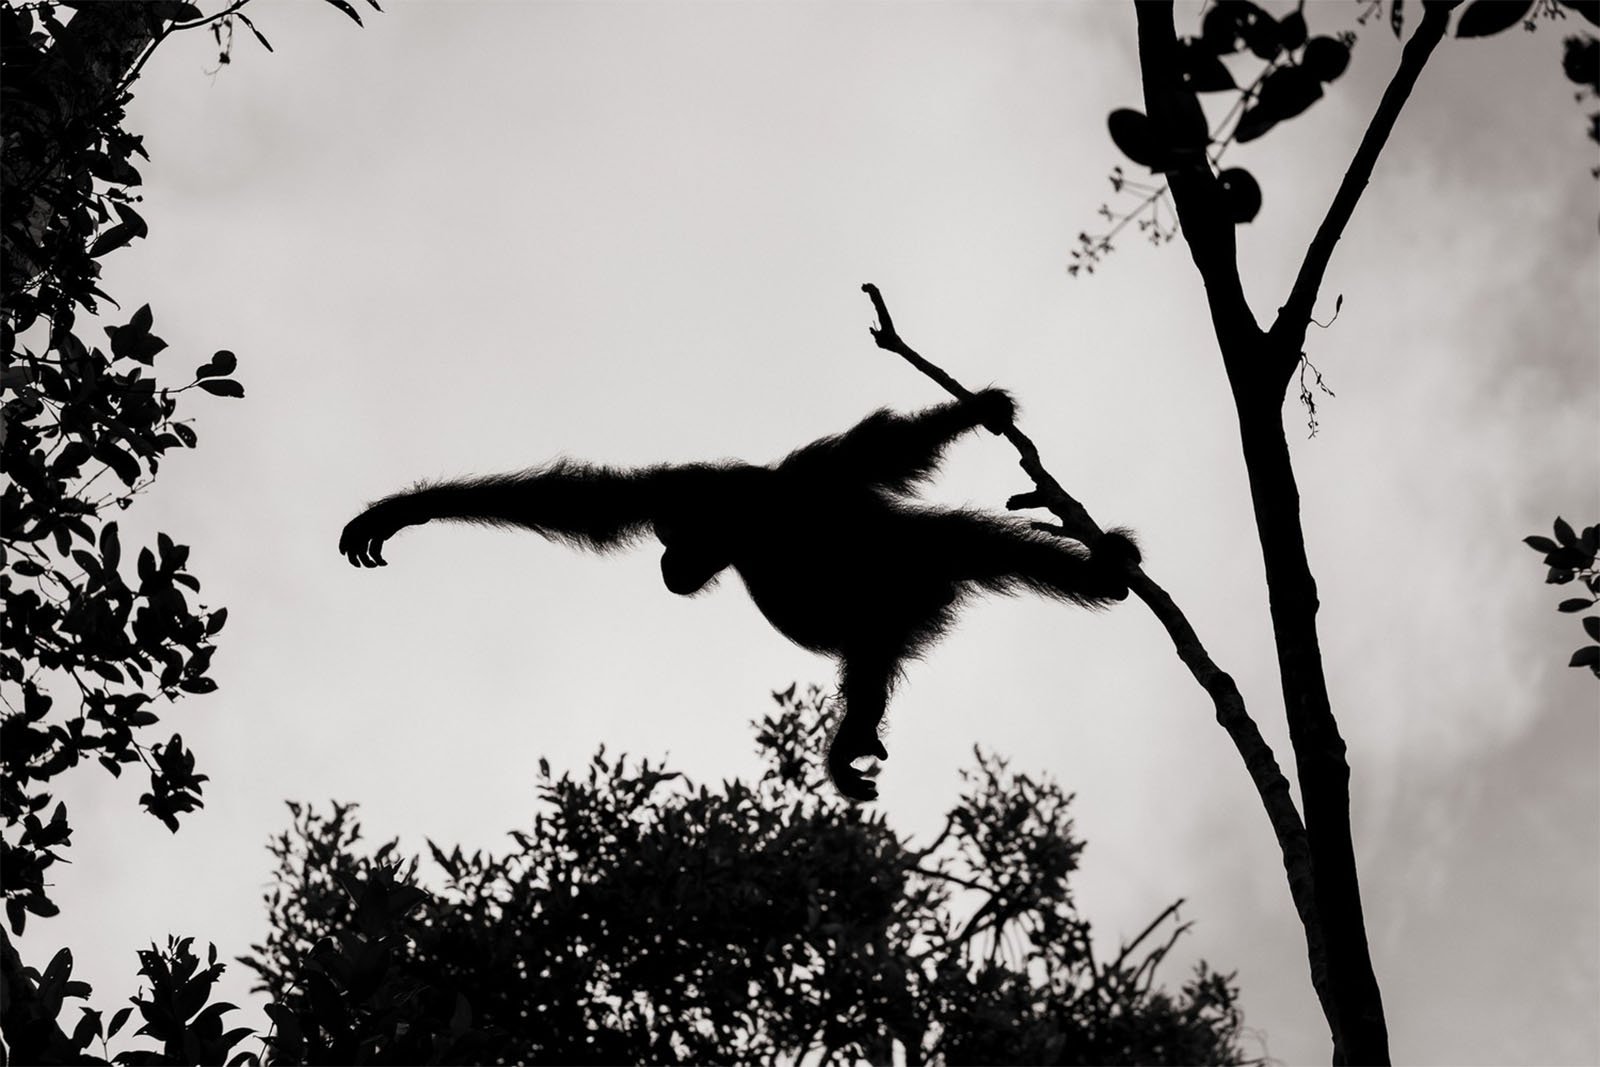 Silhouette of a primate stretched out on a tree branch against a cloudy sky, with surrounding foliage in the foreground and background.